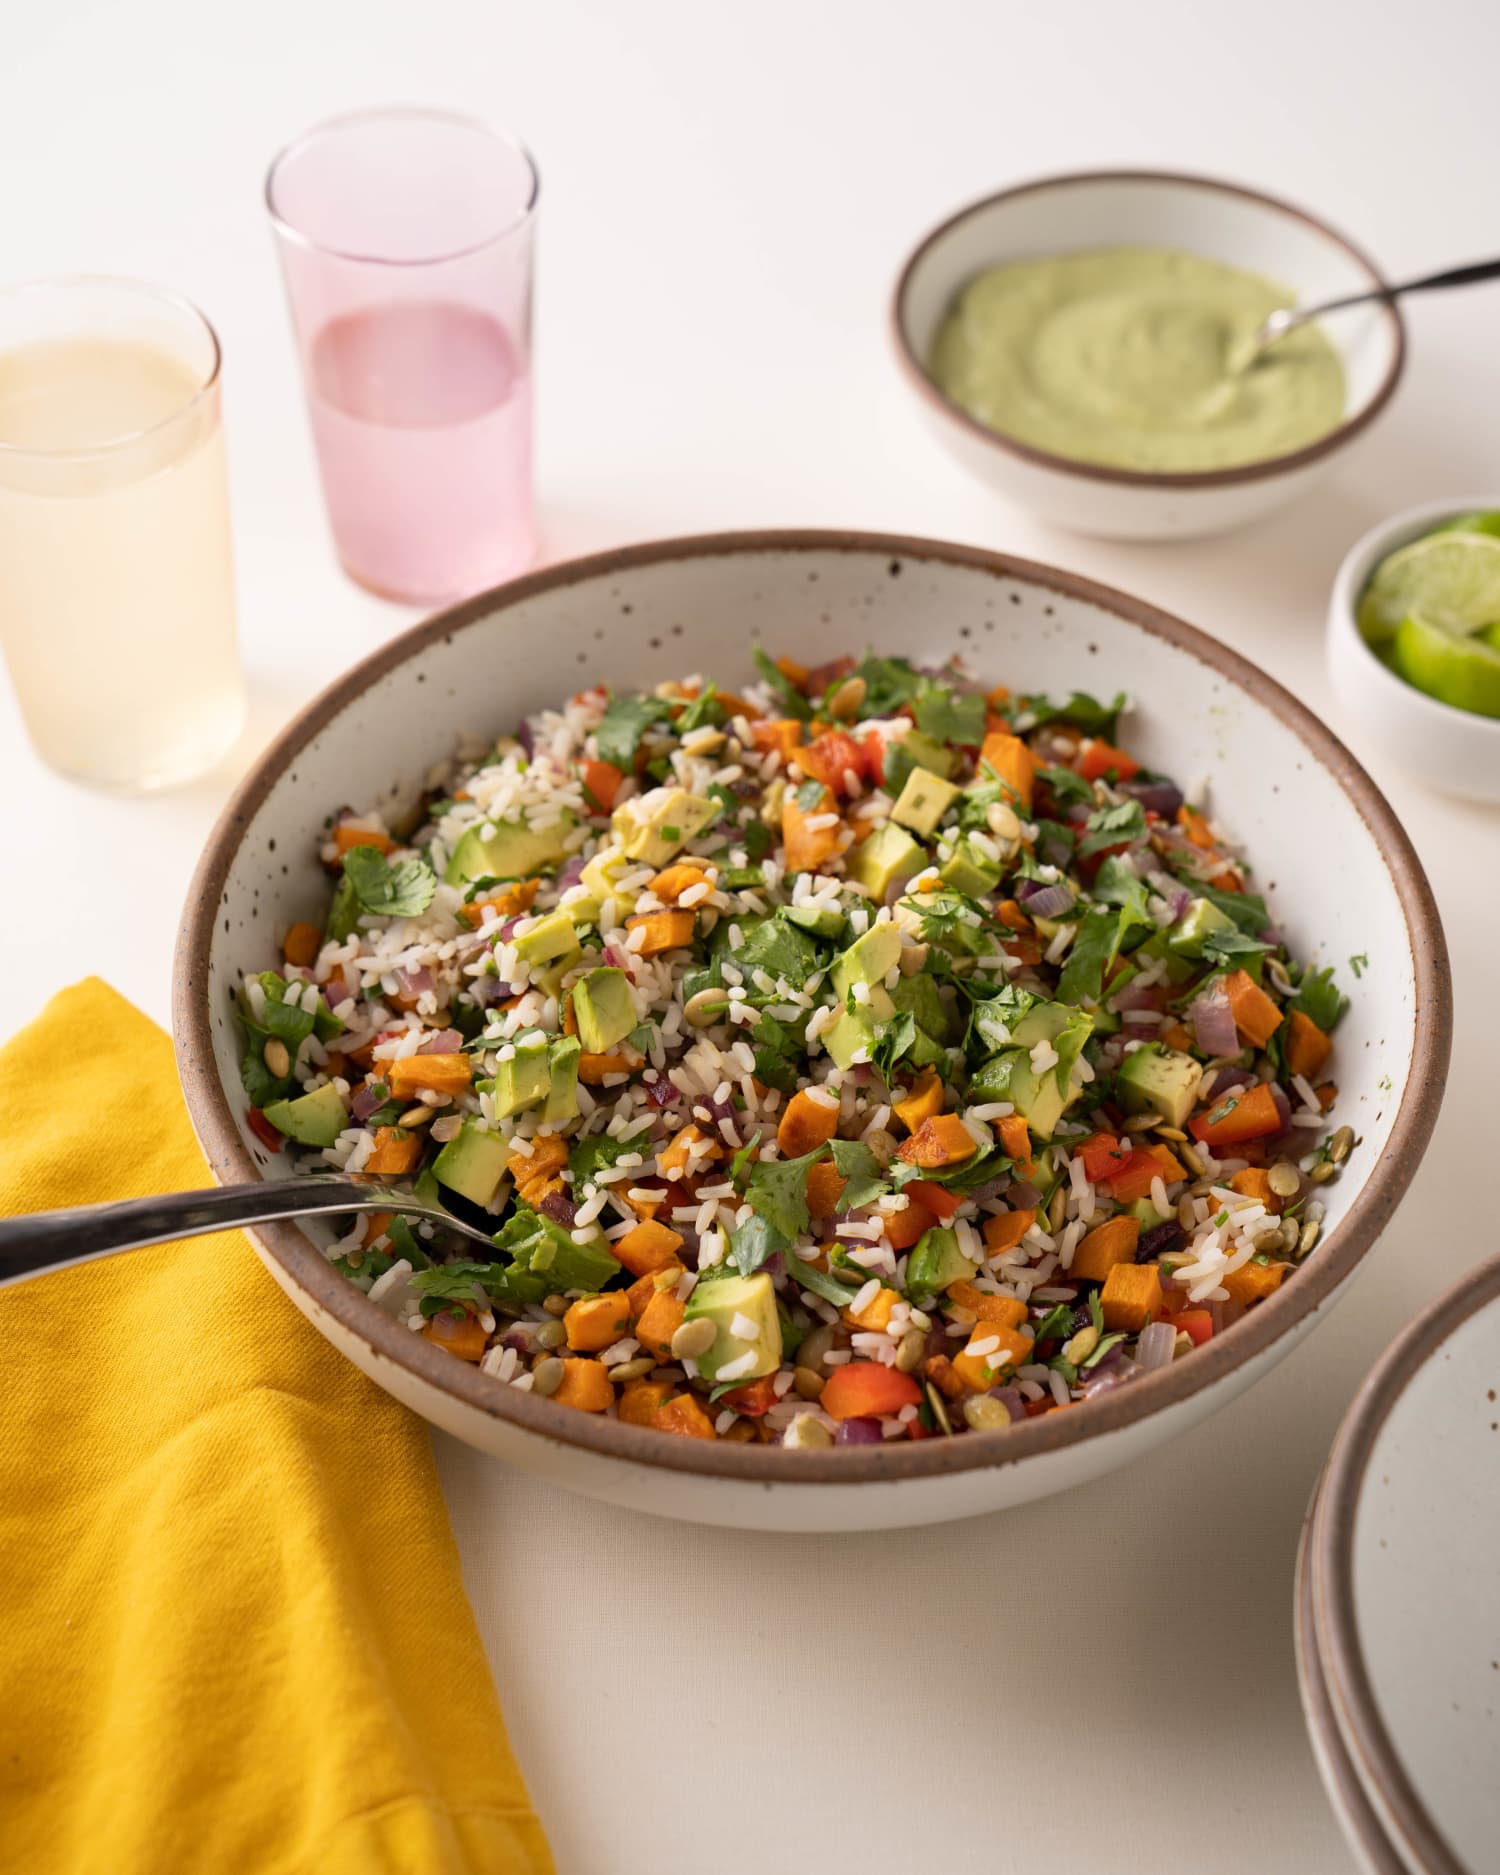 Try This Roasted Veggie Rice Salad for Its Creamy Avocado Dressing — and a Chance at $2,500